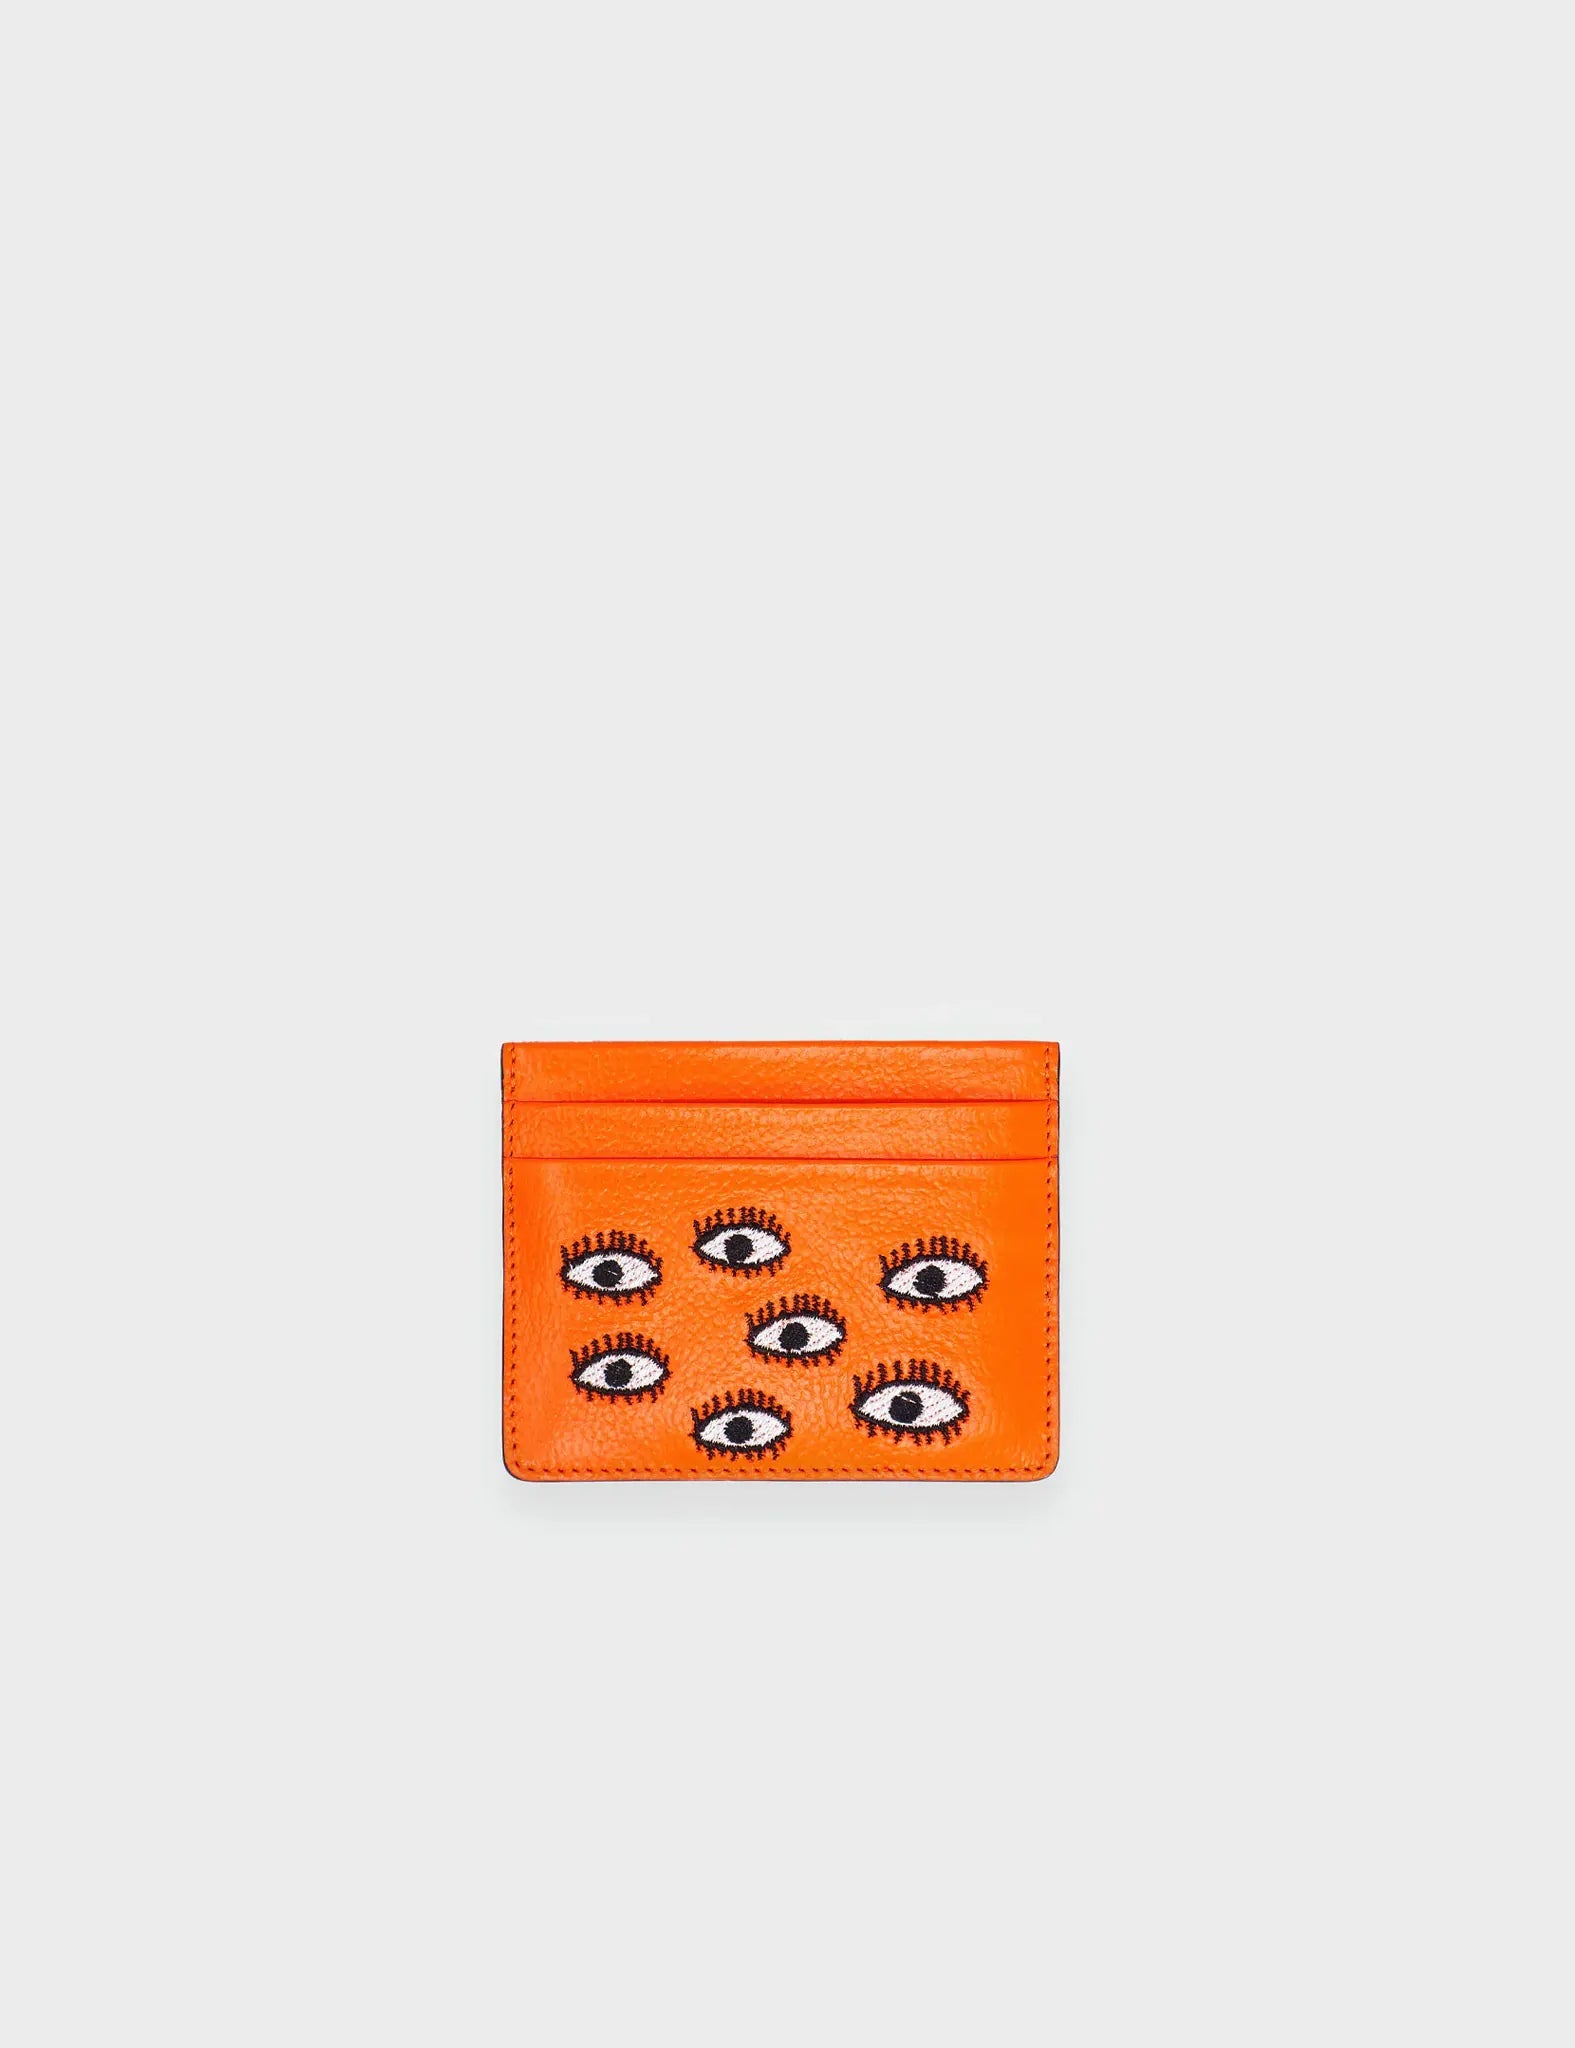 Filium Neon Orange Leather Cardholder -  Front viewAll Over Eyes Embroidery - Front view